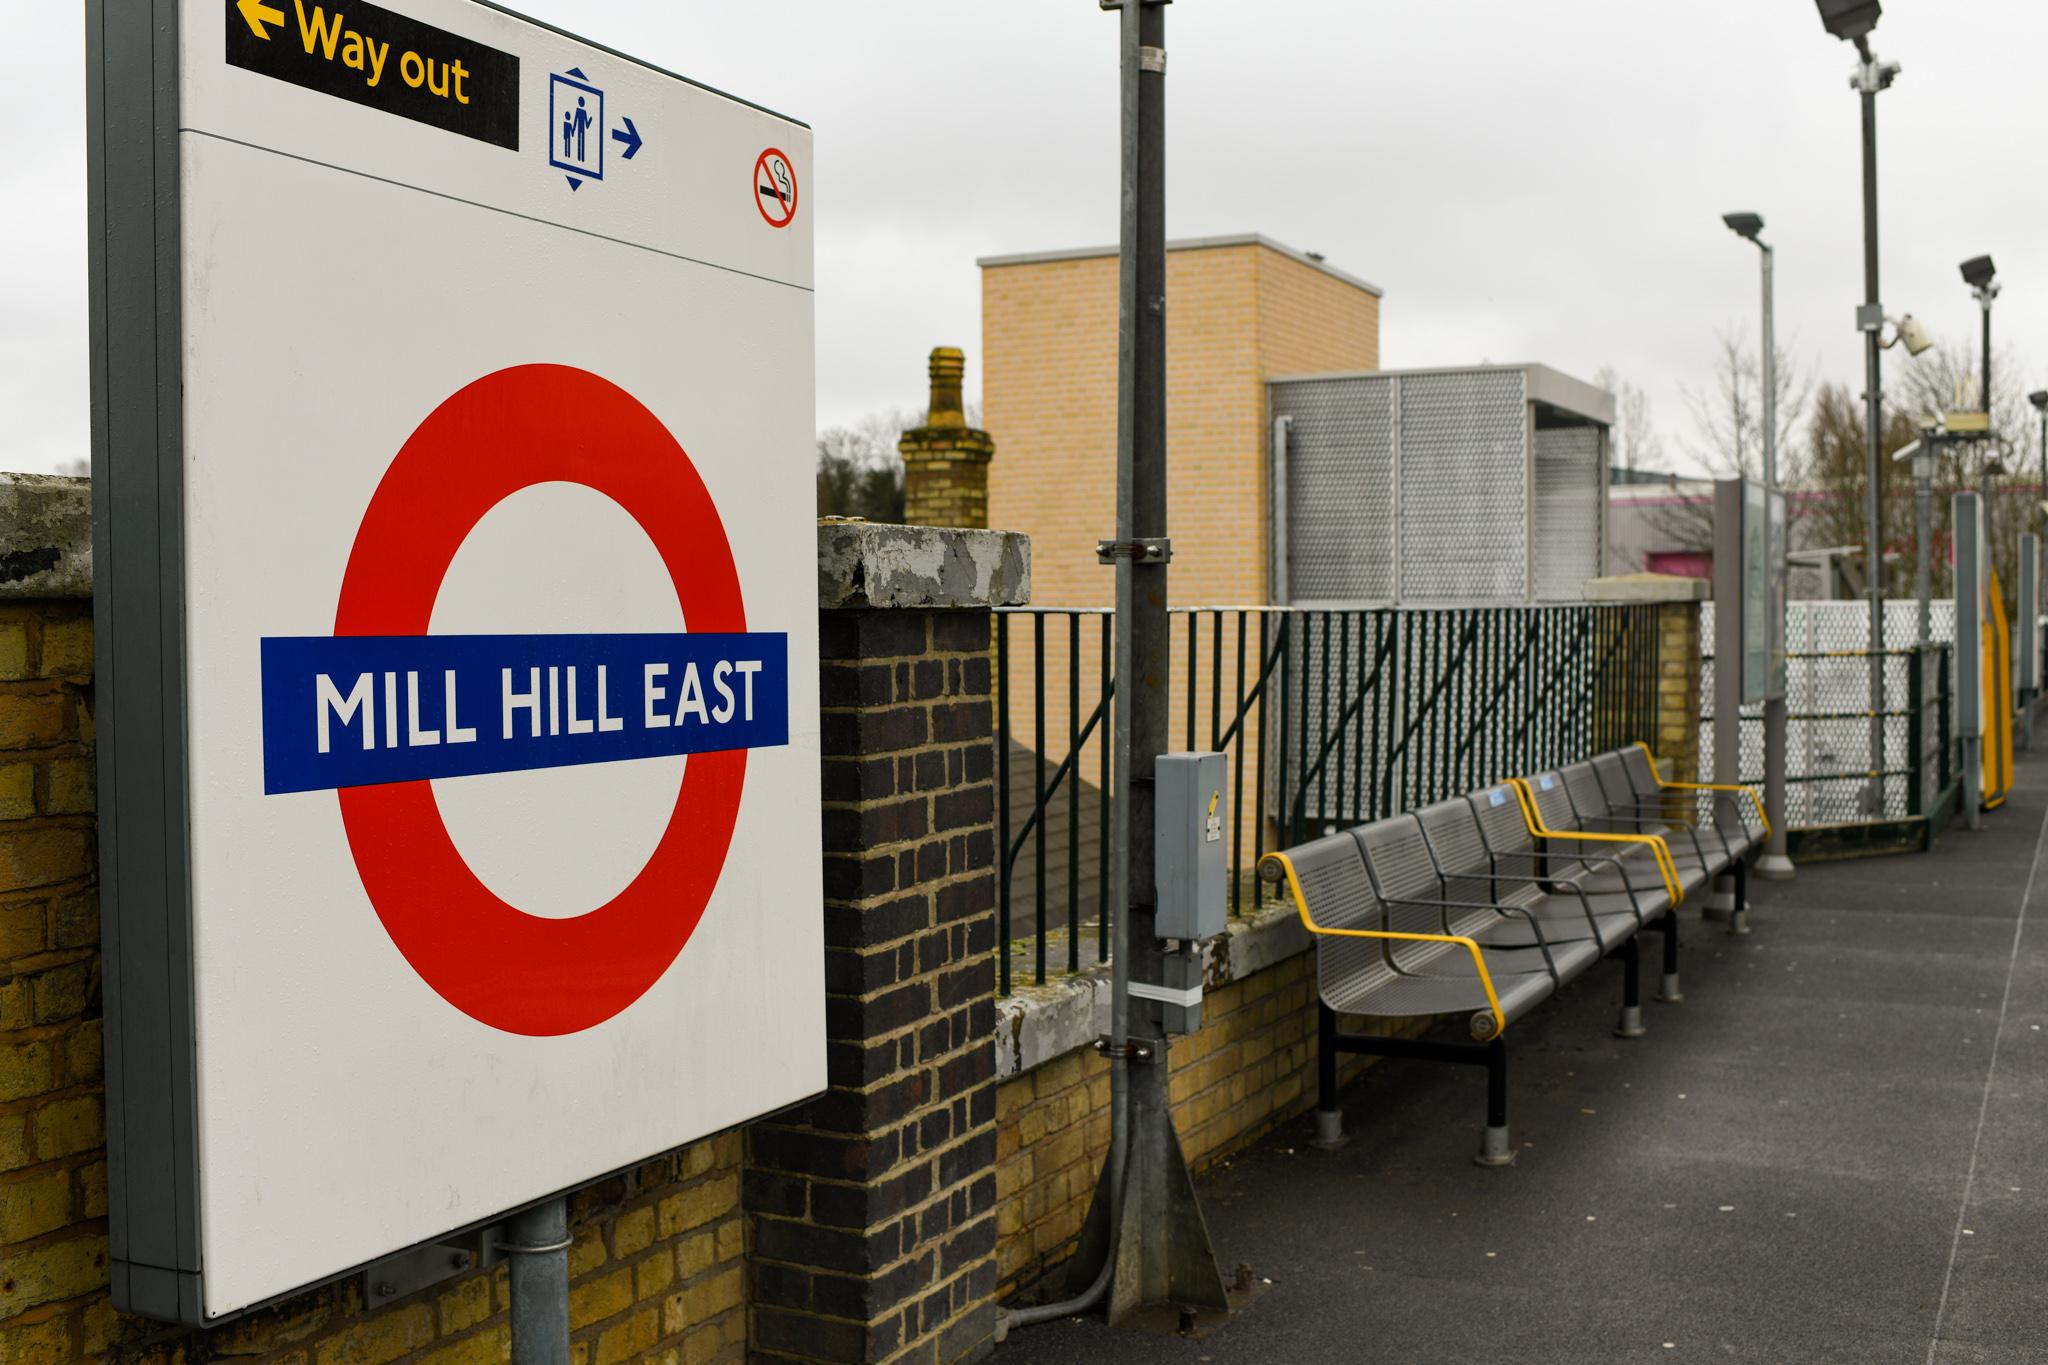 Mill Hill East Underground Station